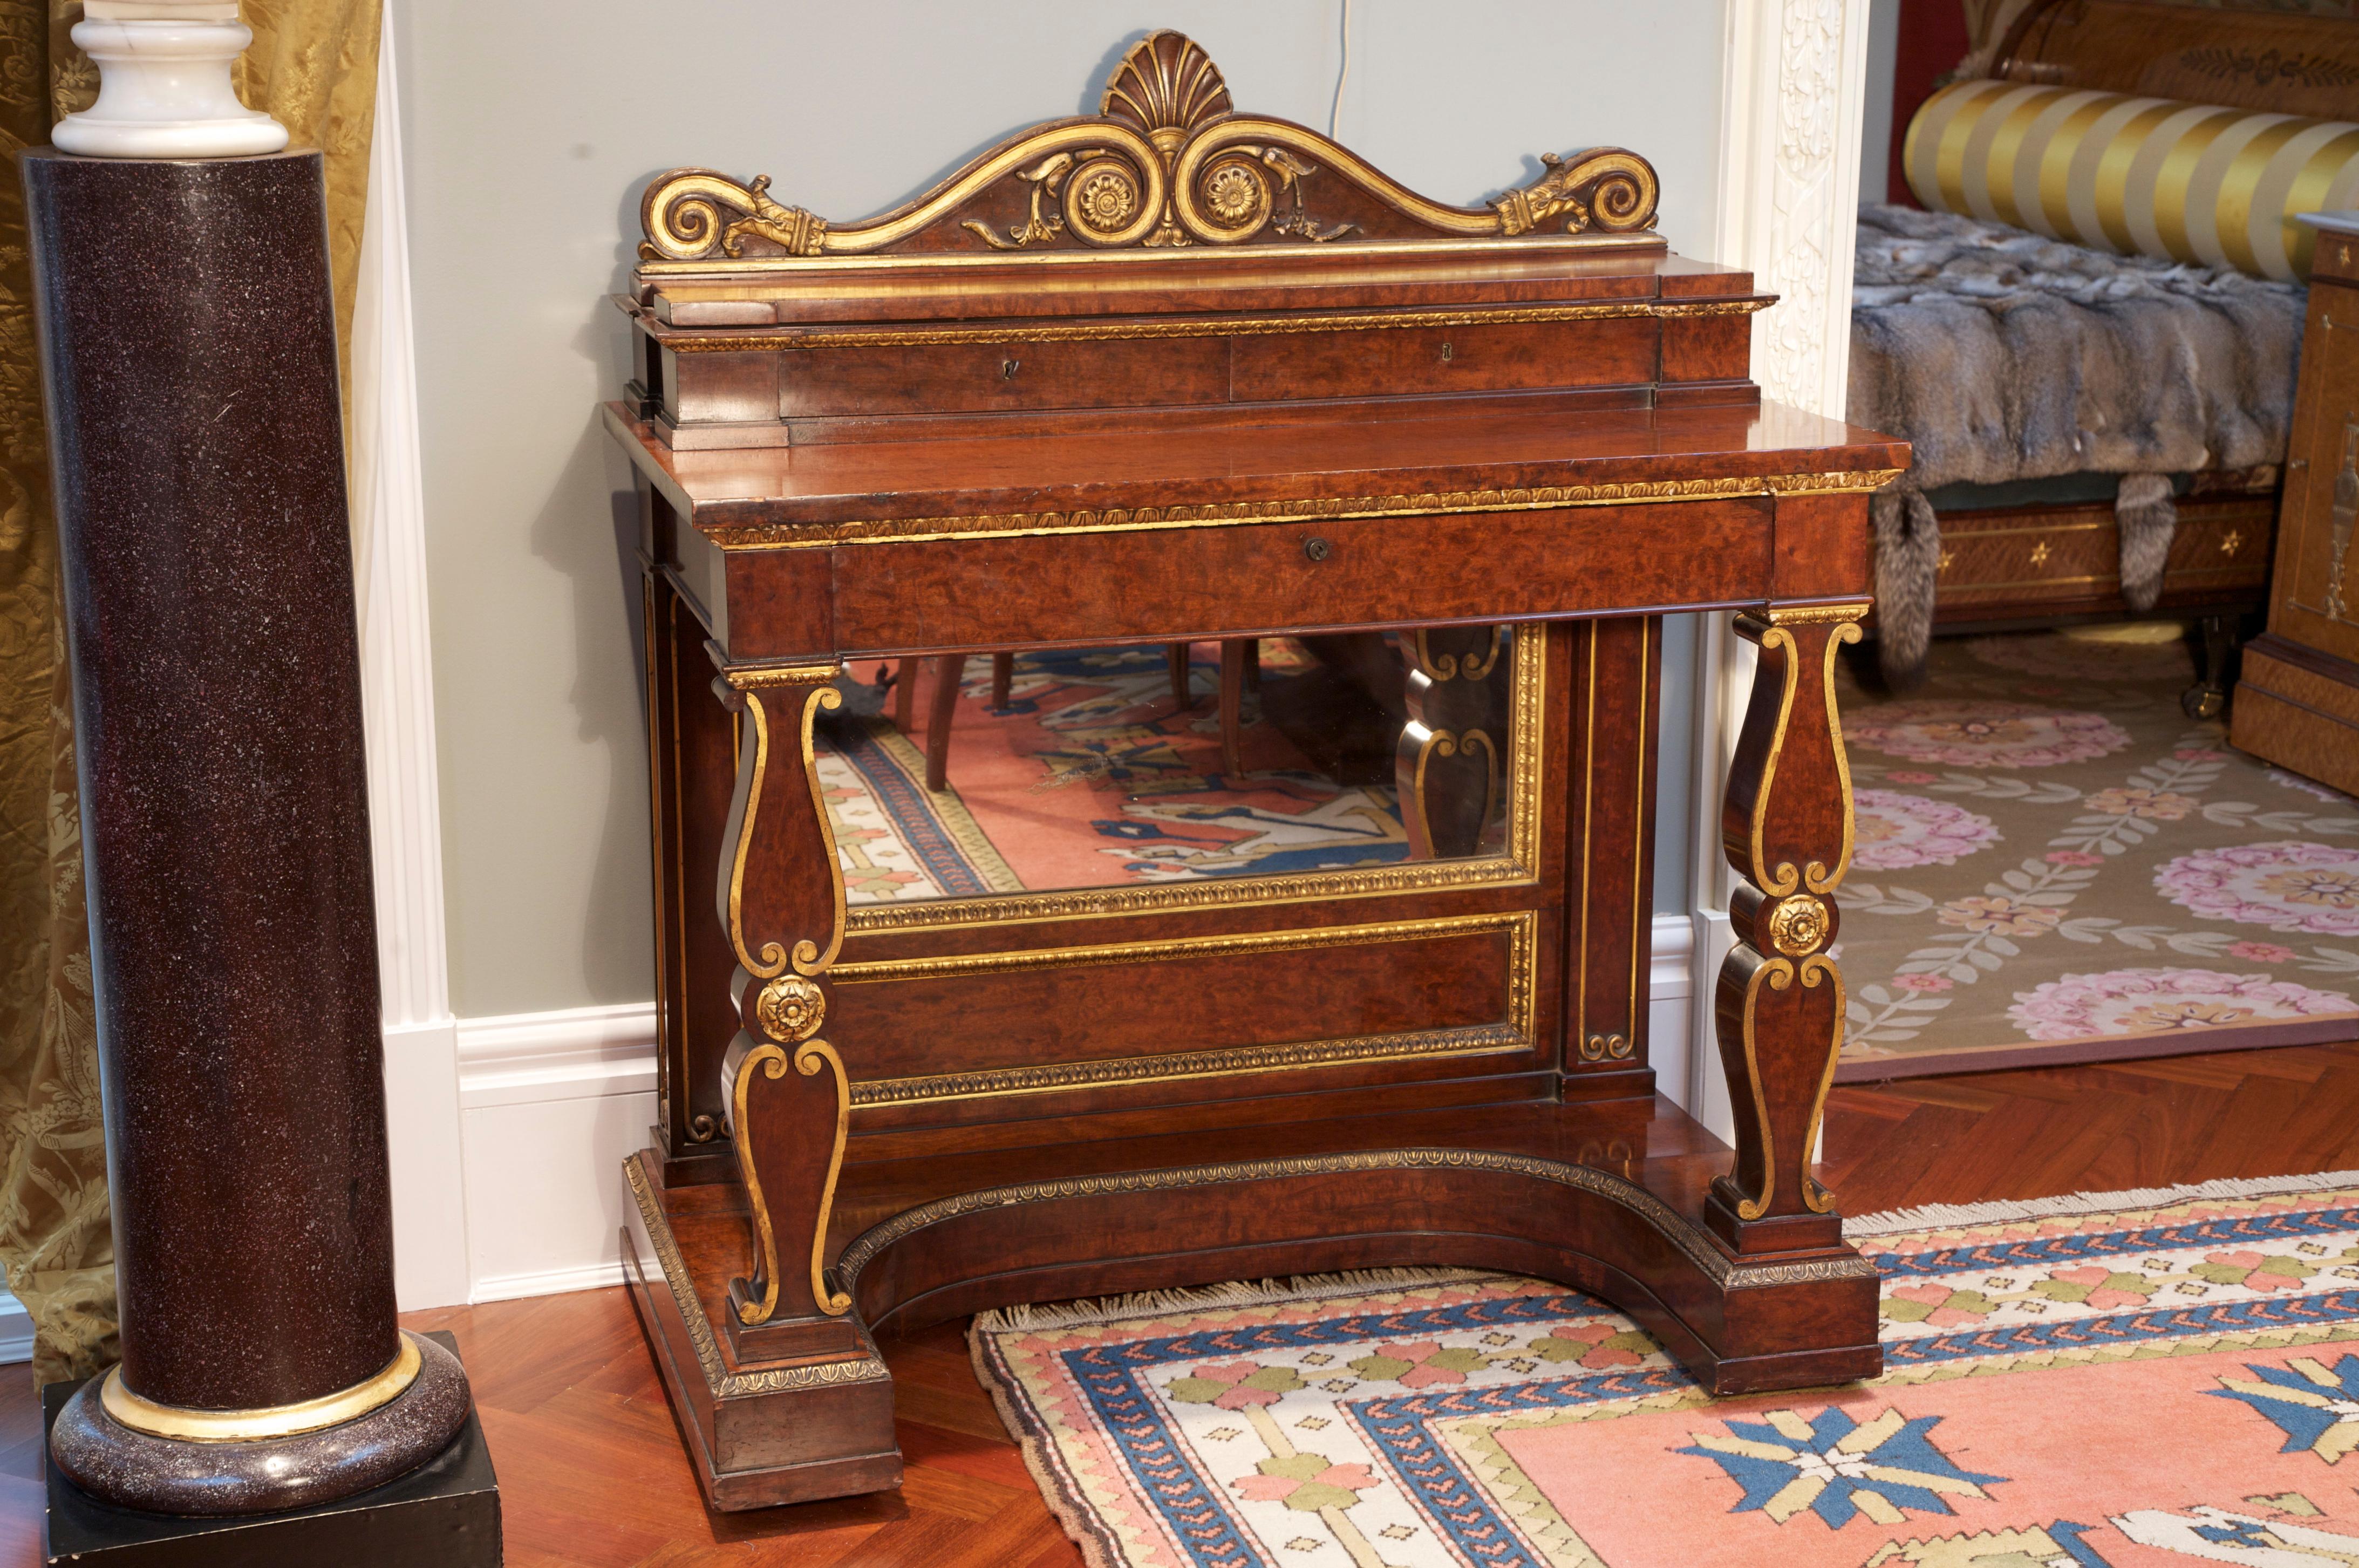  An Exceptional English Regency Dressing Table with a Royal Family Provenance 8